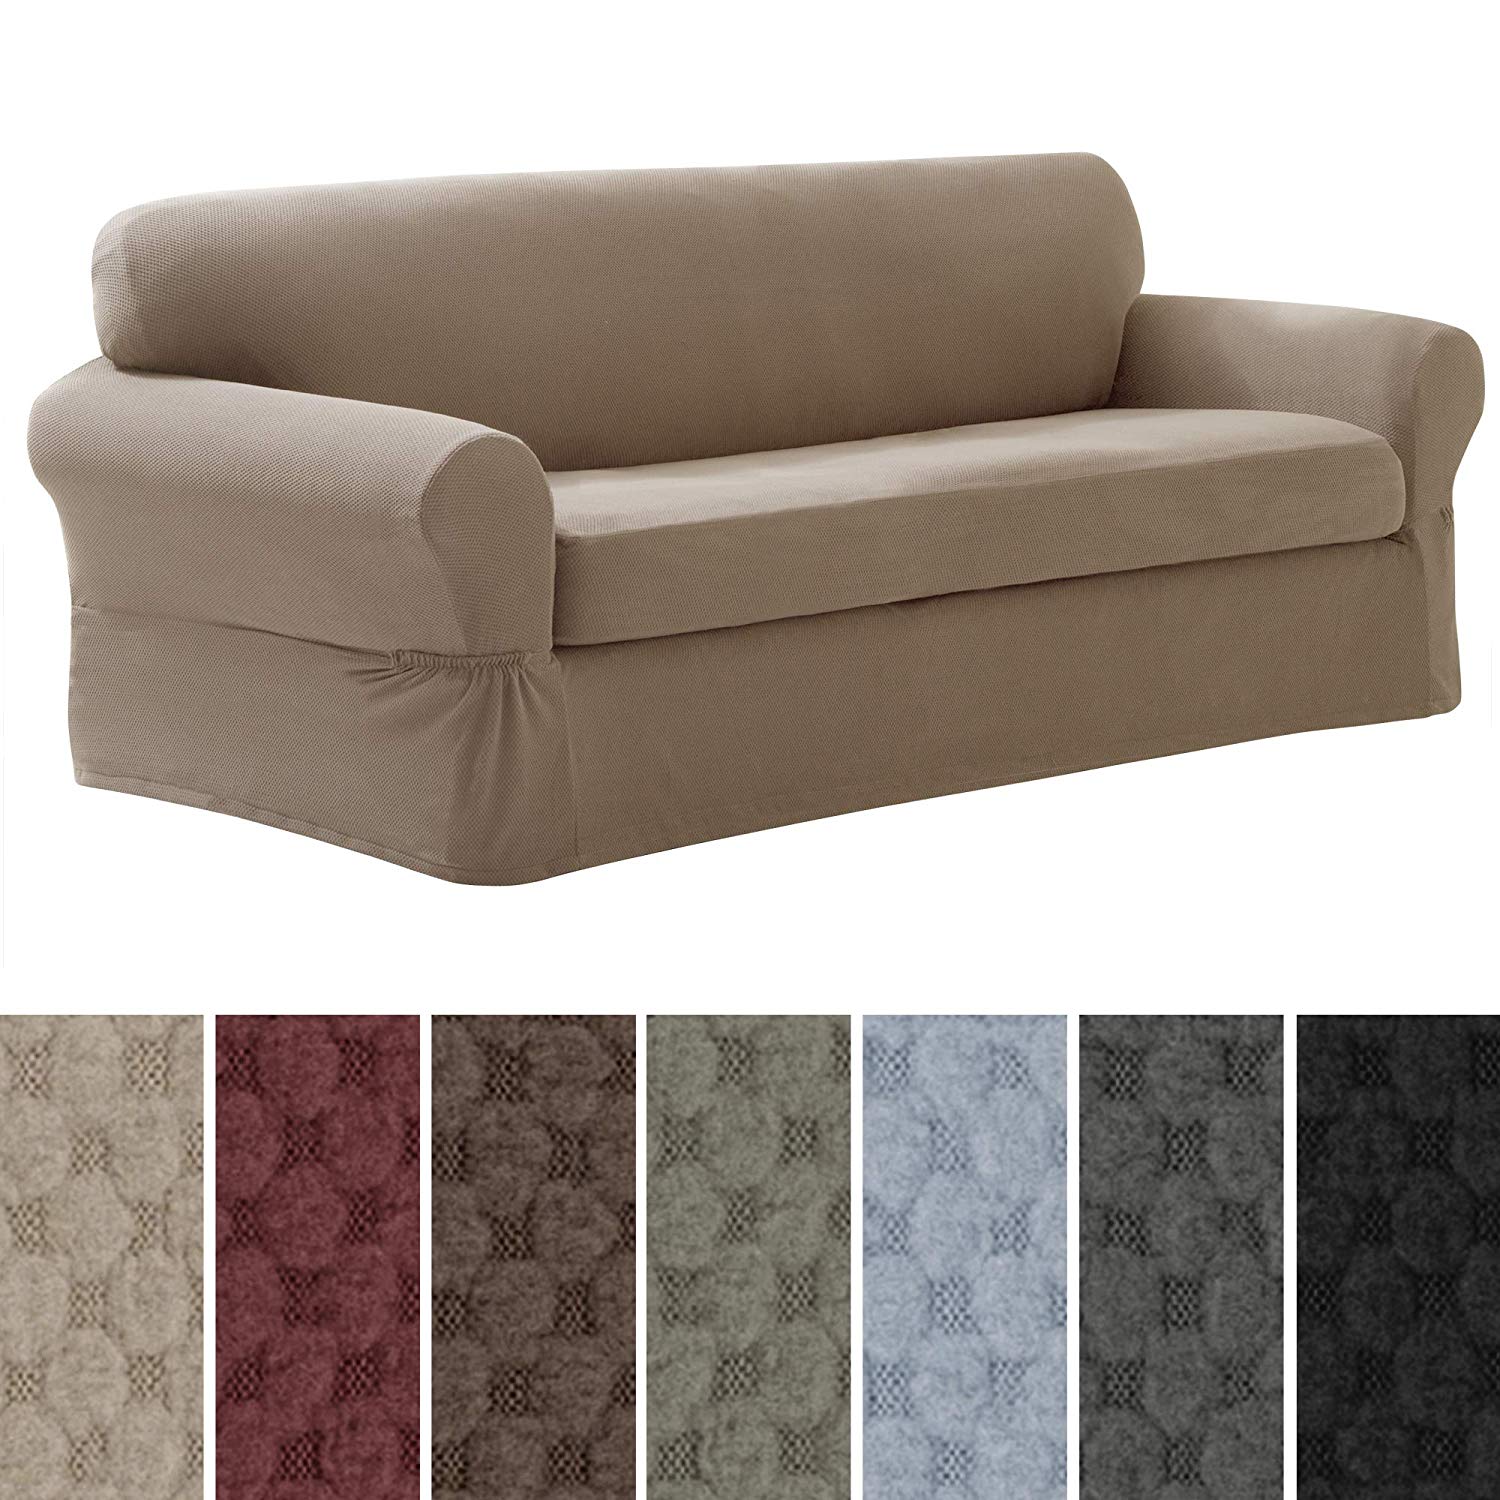 Maytex-Pixel-Stretch Two-Piece-Slipcover